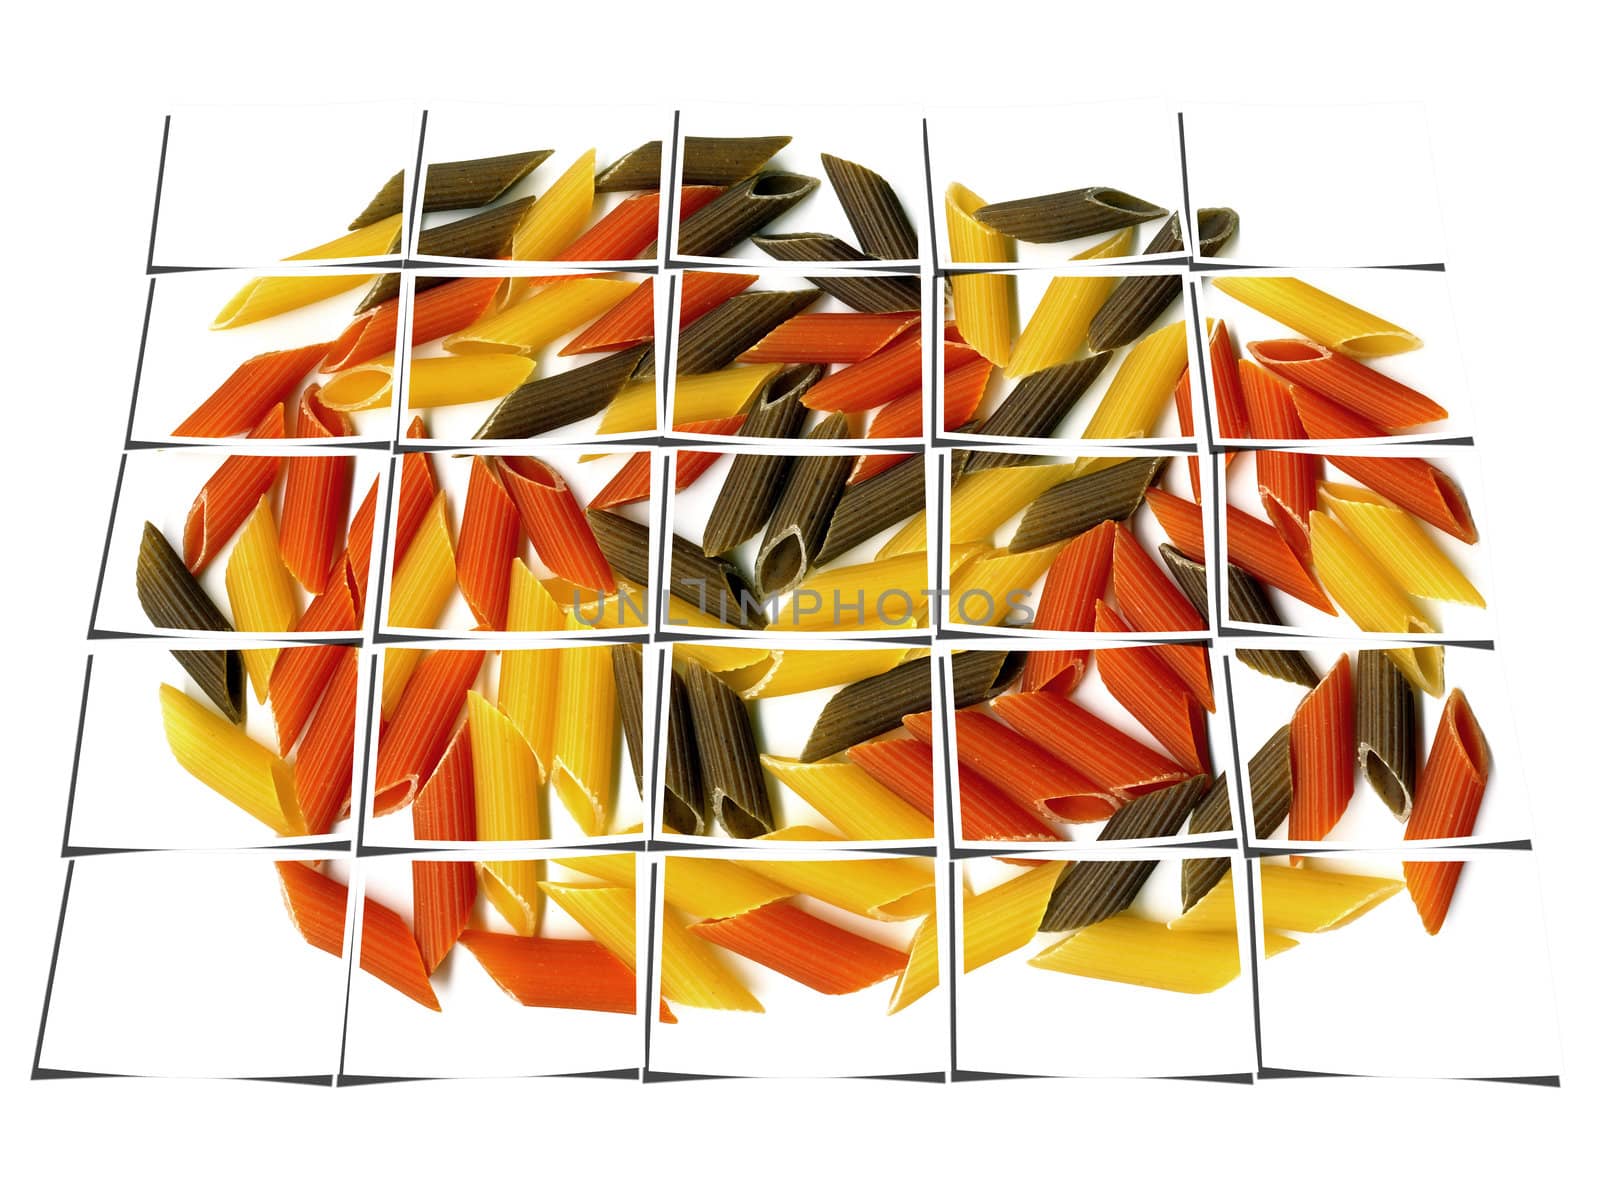  penne italian pasta on white background collage composition of multiple images over white